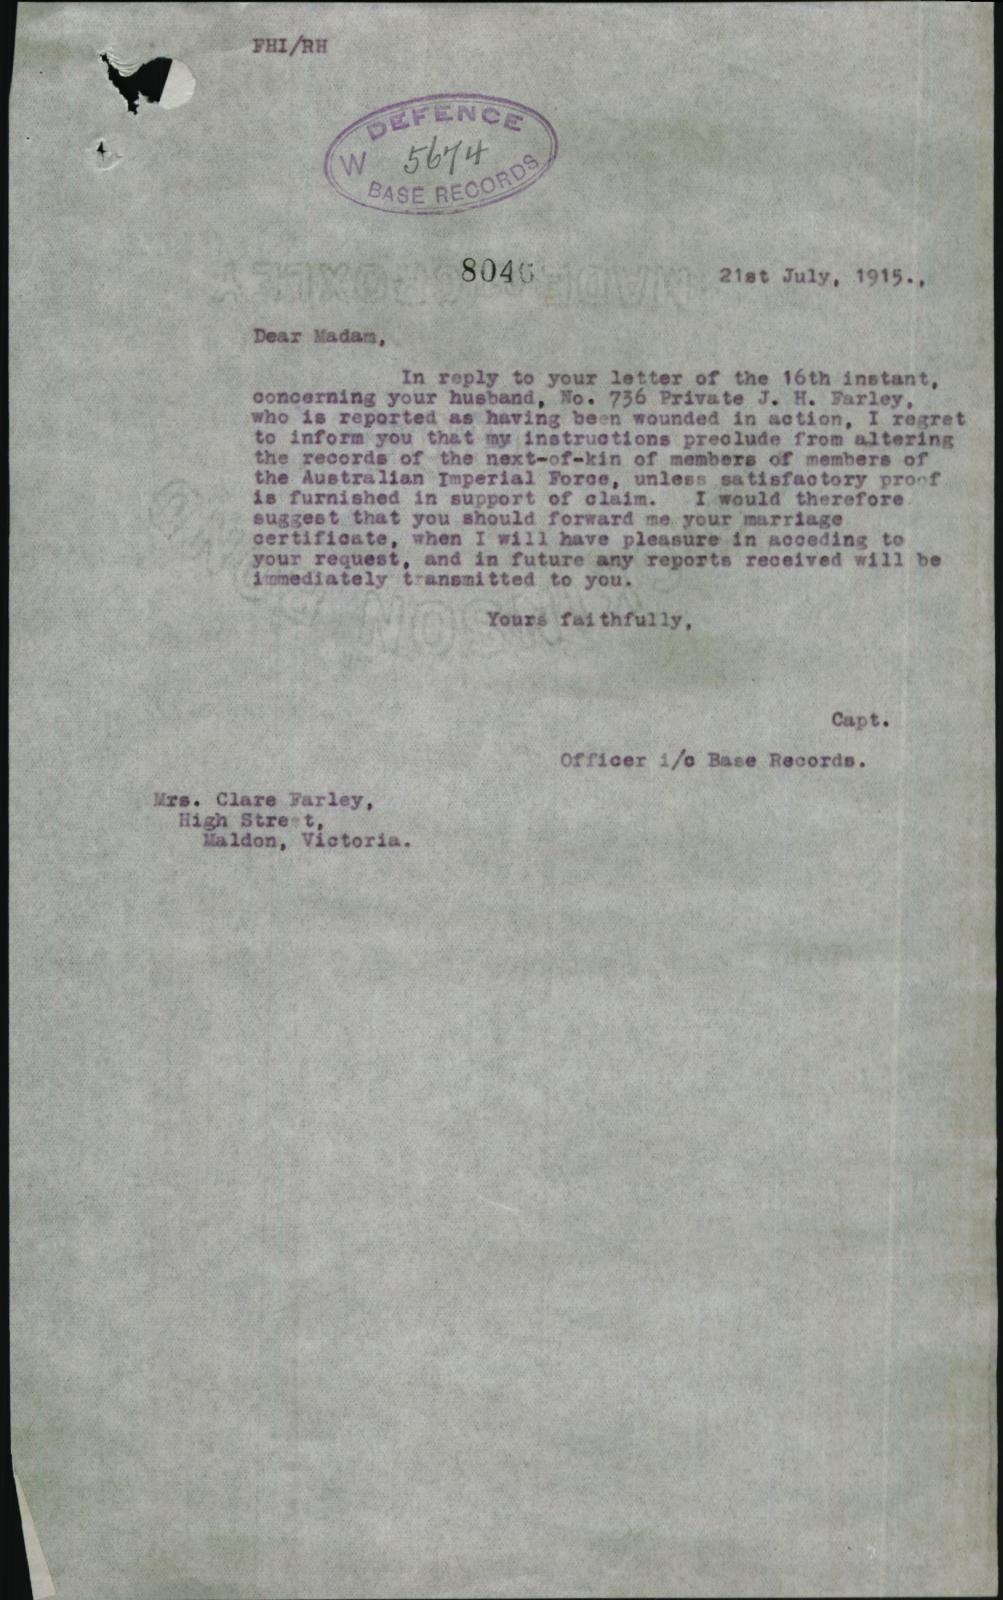 Letters between Clara Farley and AIF